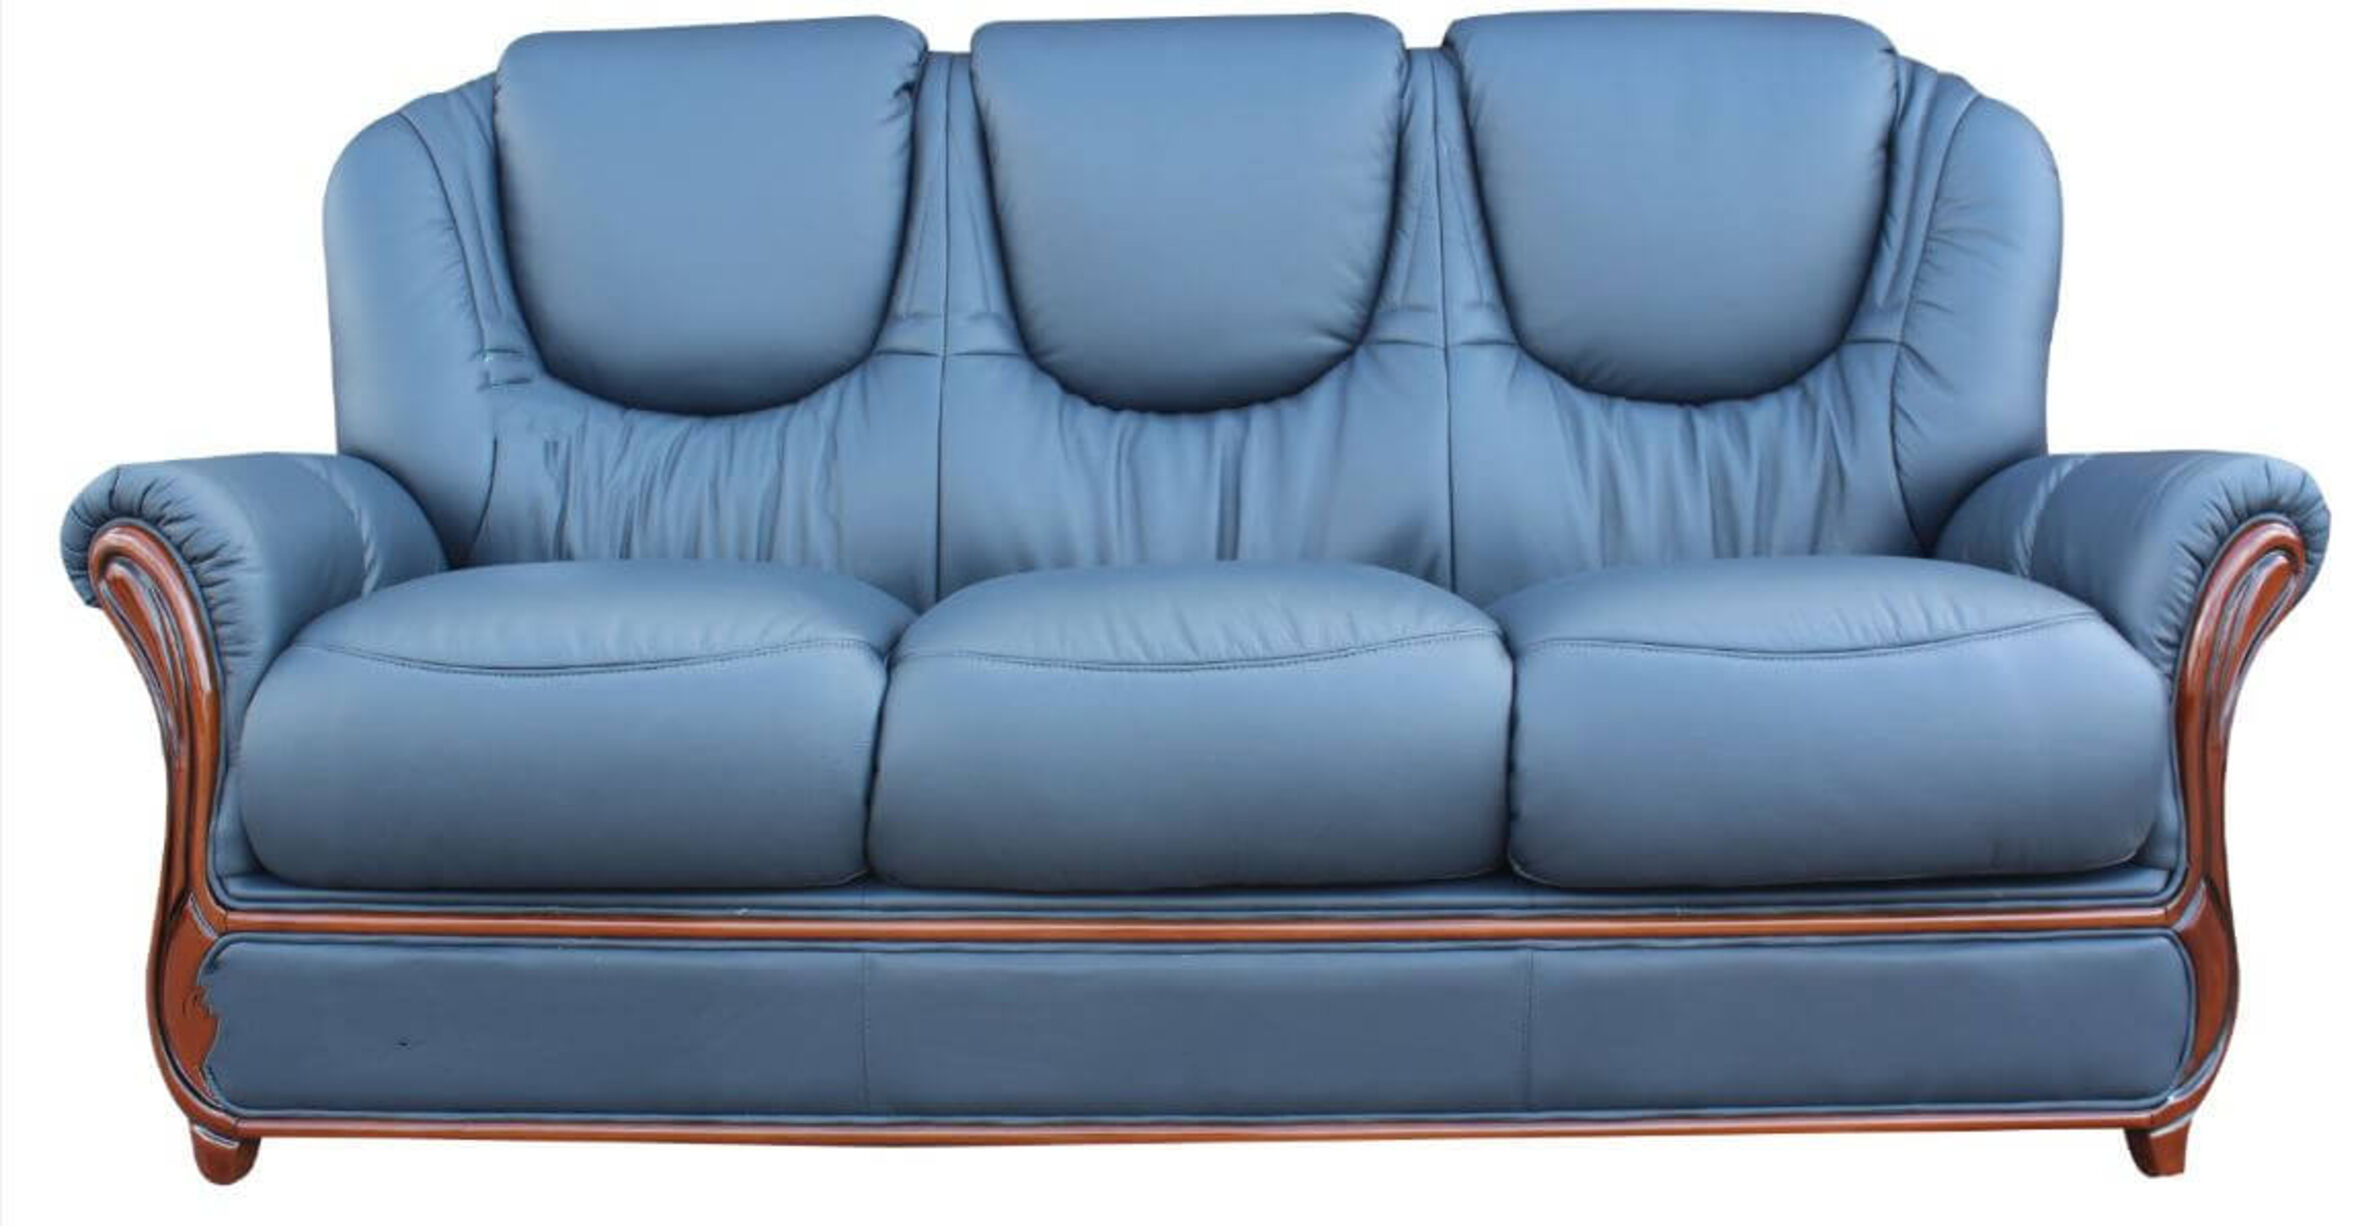 Mississippi Genuine Italian Leather 3, Navy Blue Leather Sofa And Chair Set